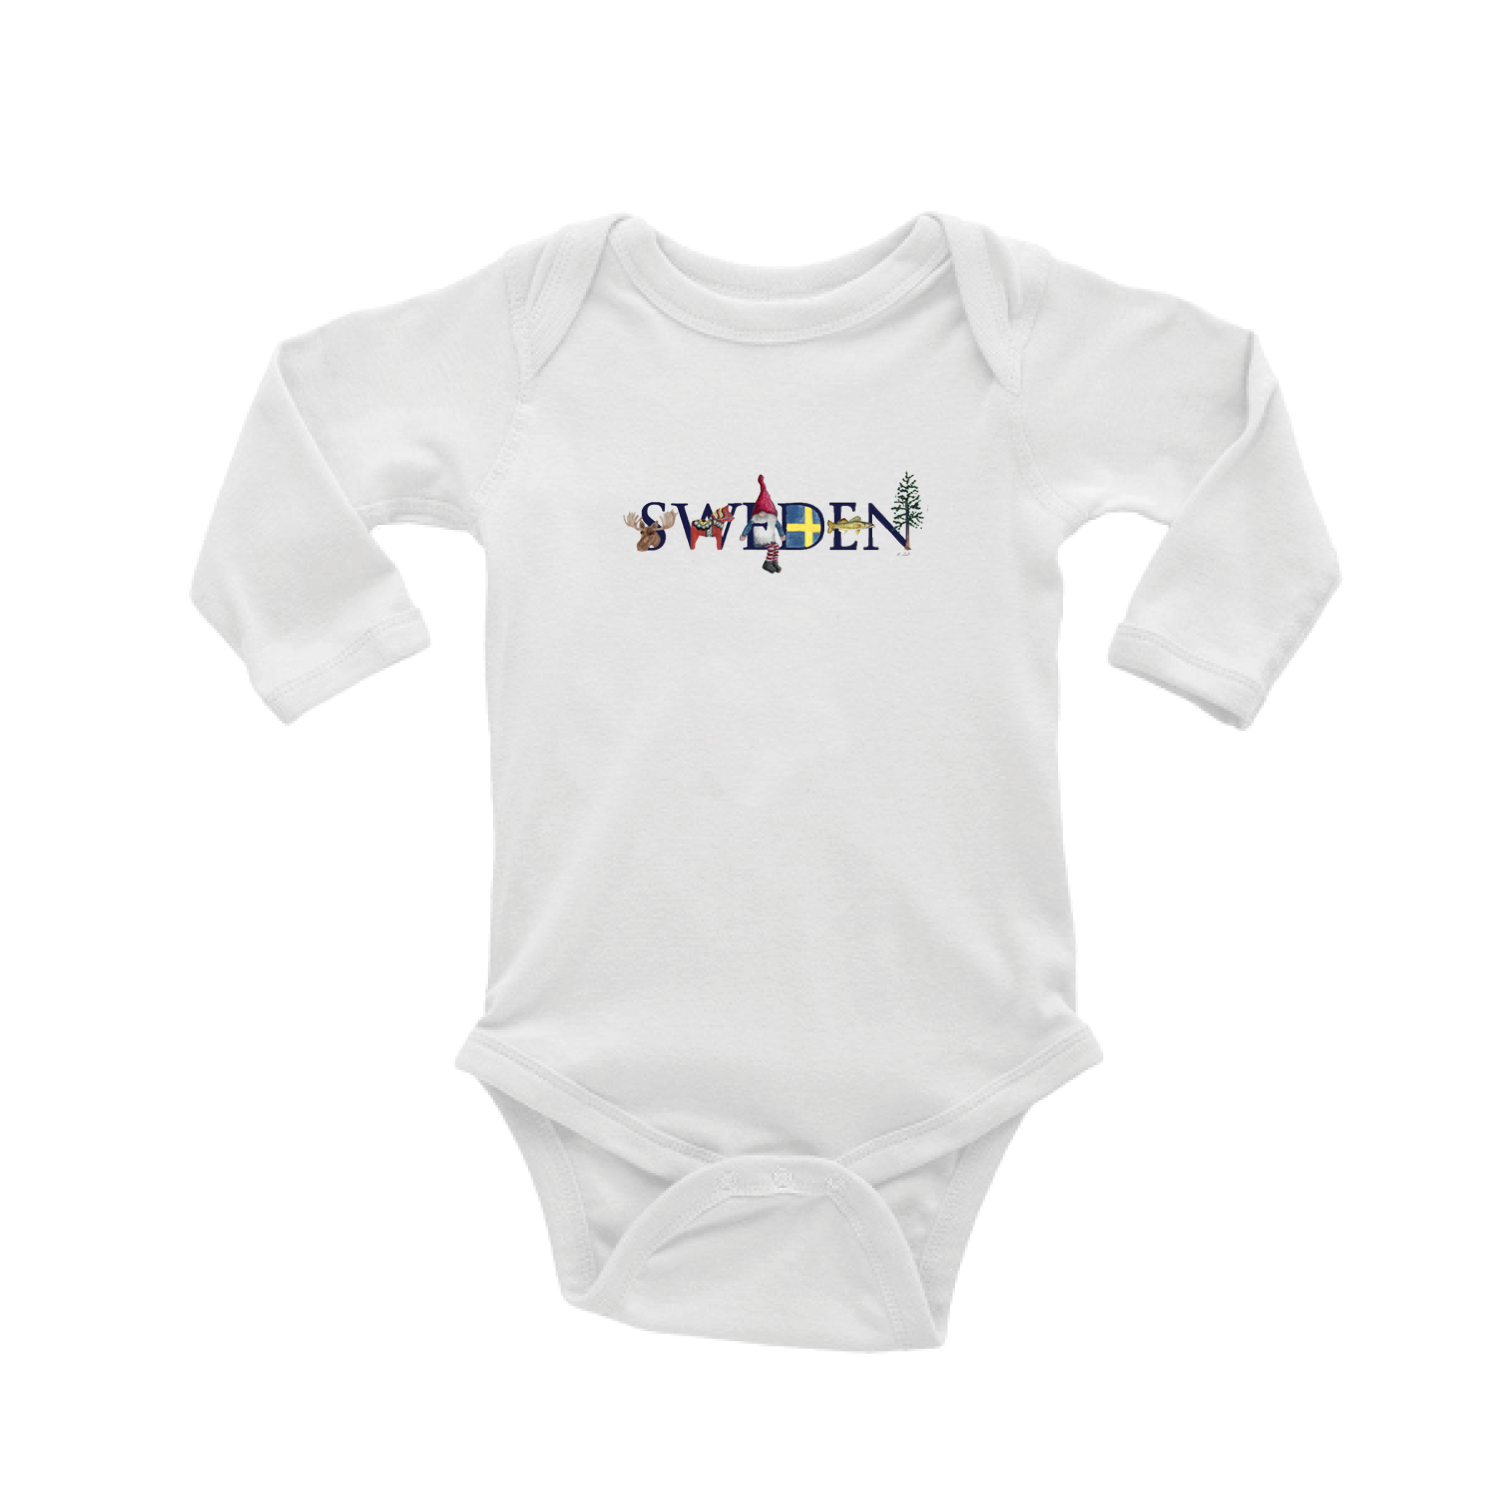 Sweden baby snap up long sleeve